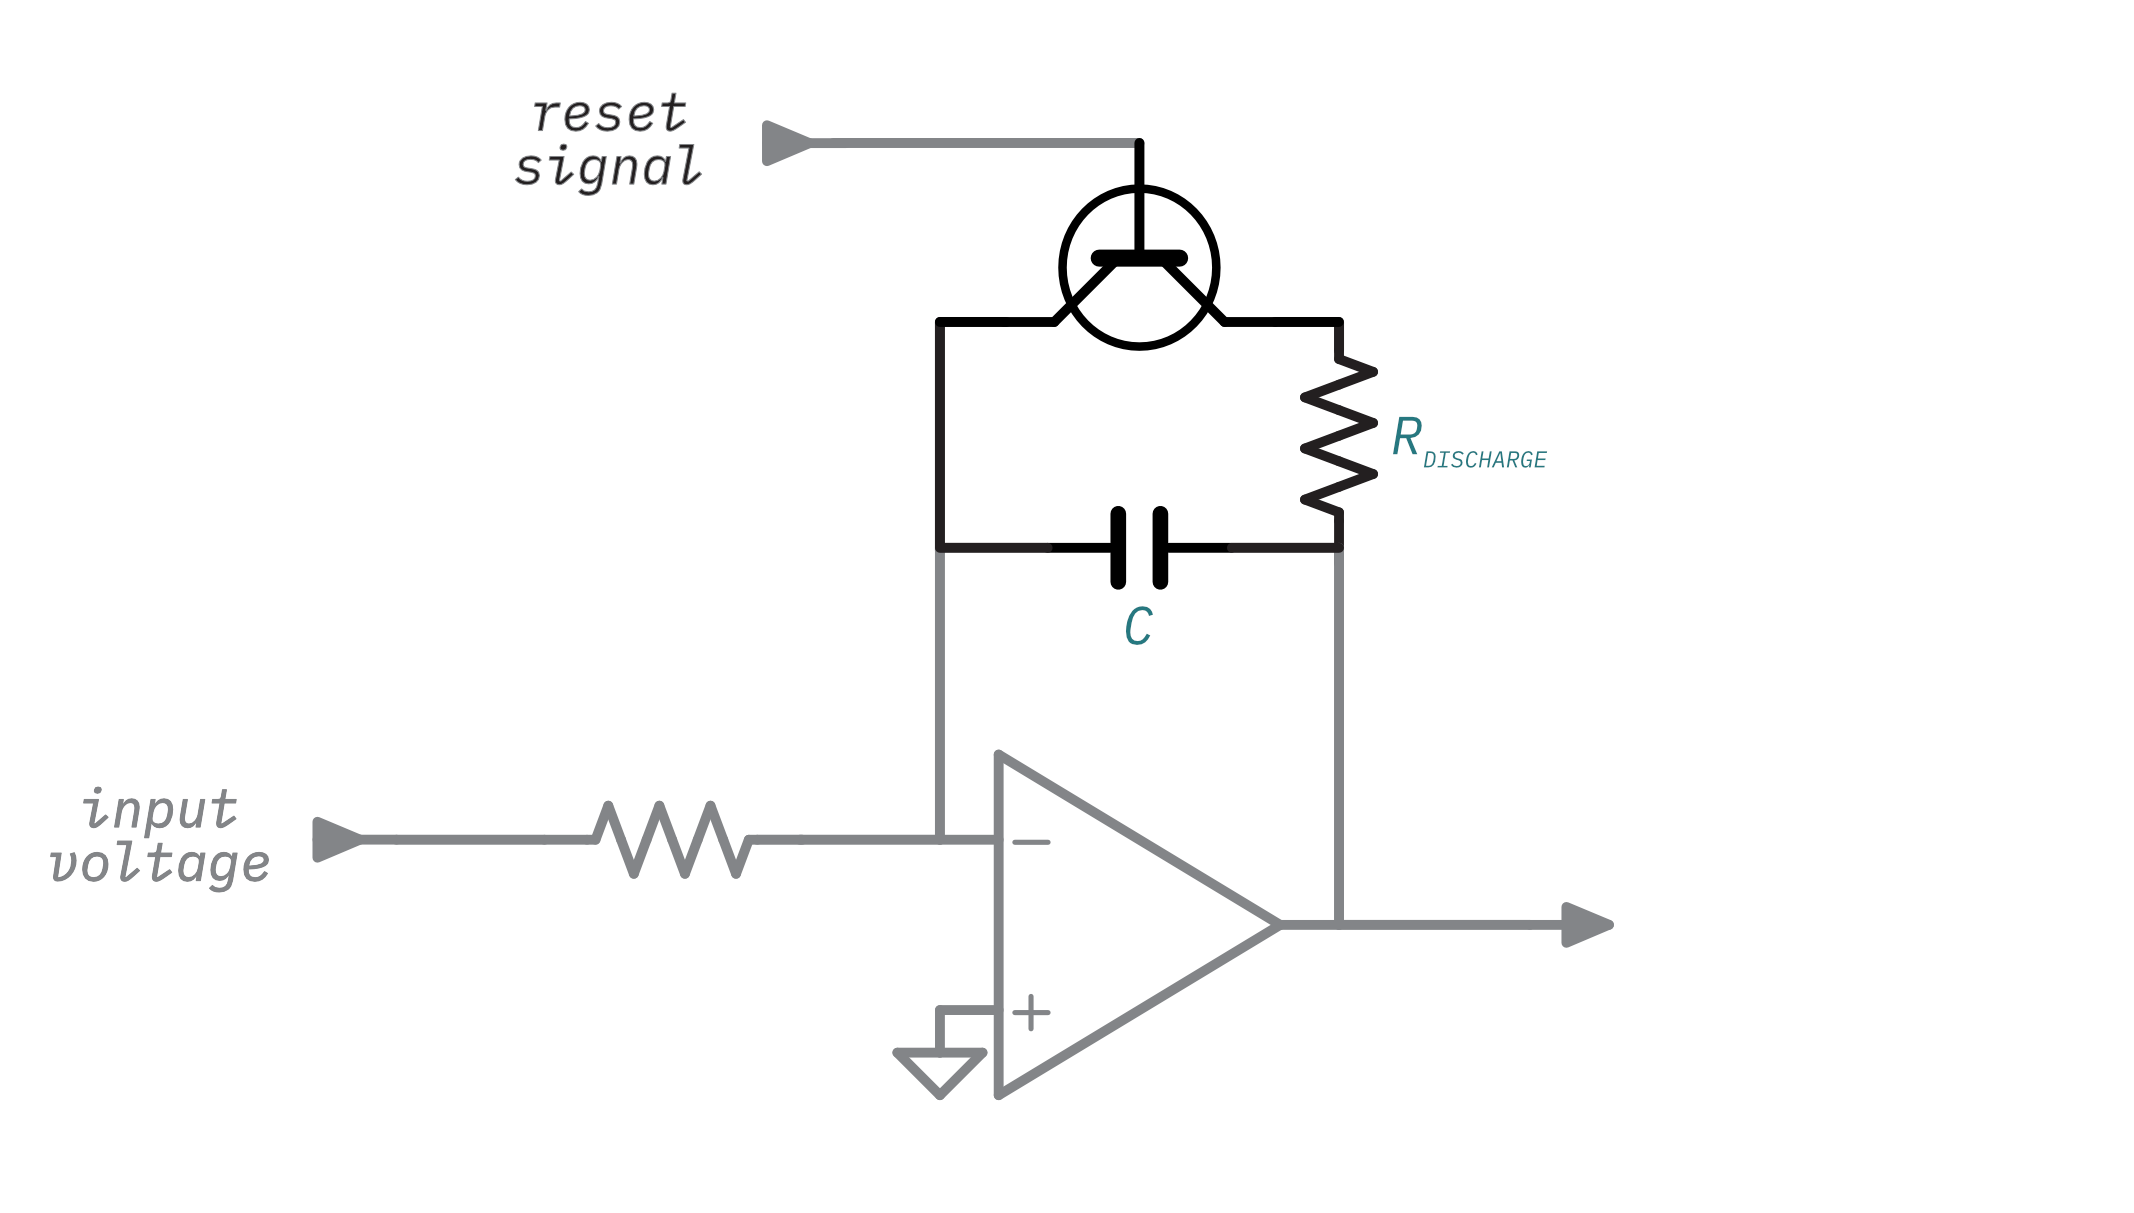 Illustration highlighting the discharge circuit